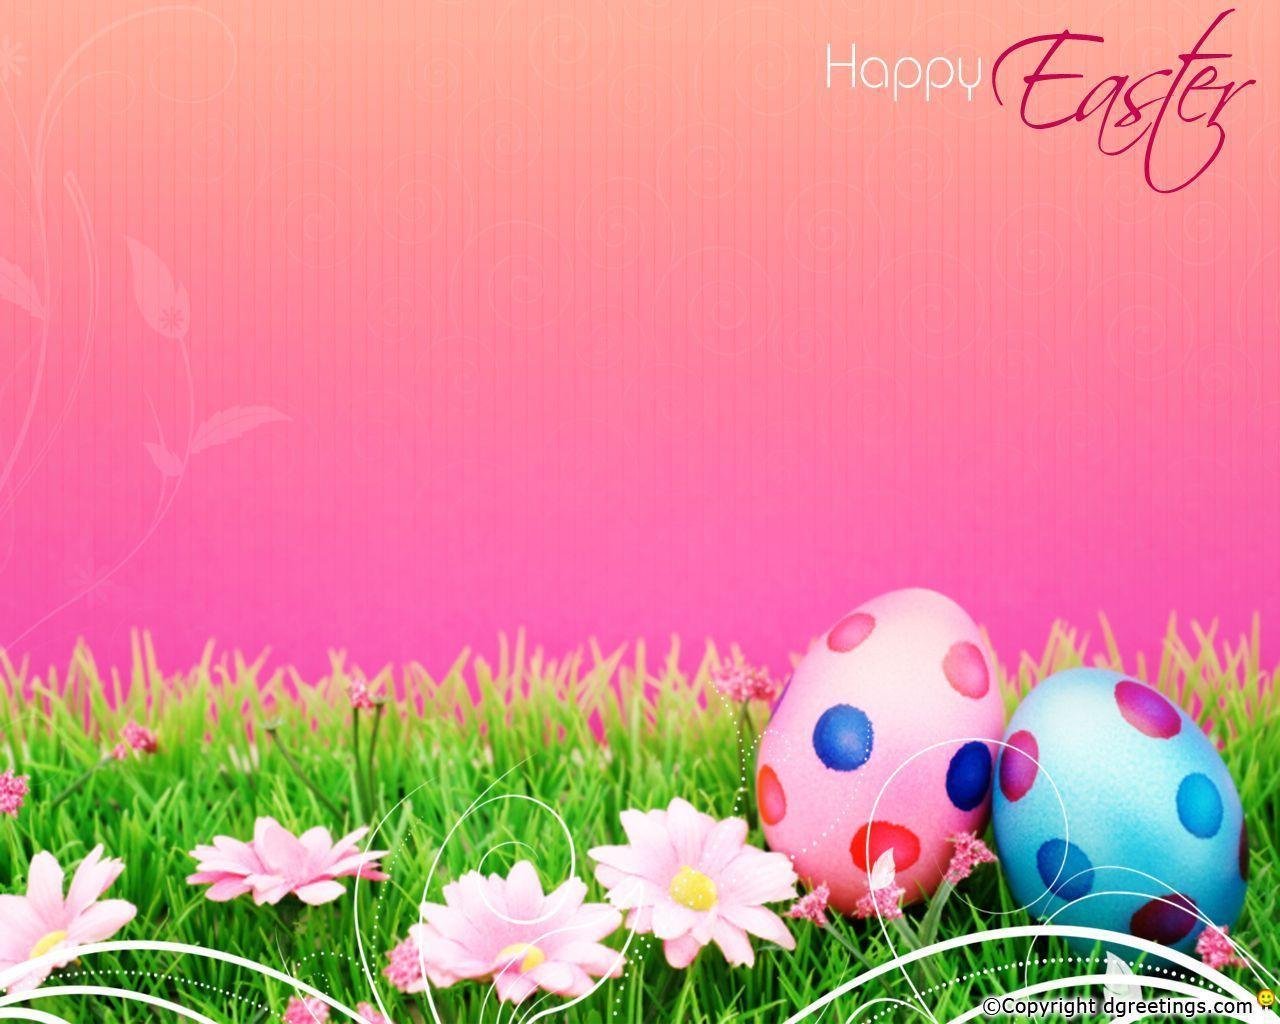 Wallpaper For > Cute Easter Background Tumblr